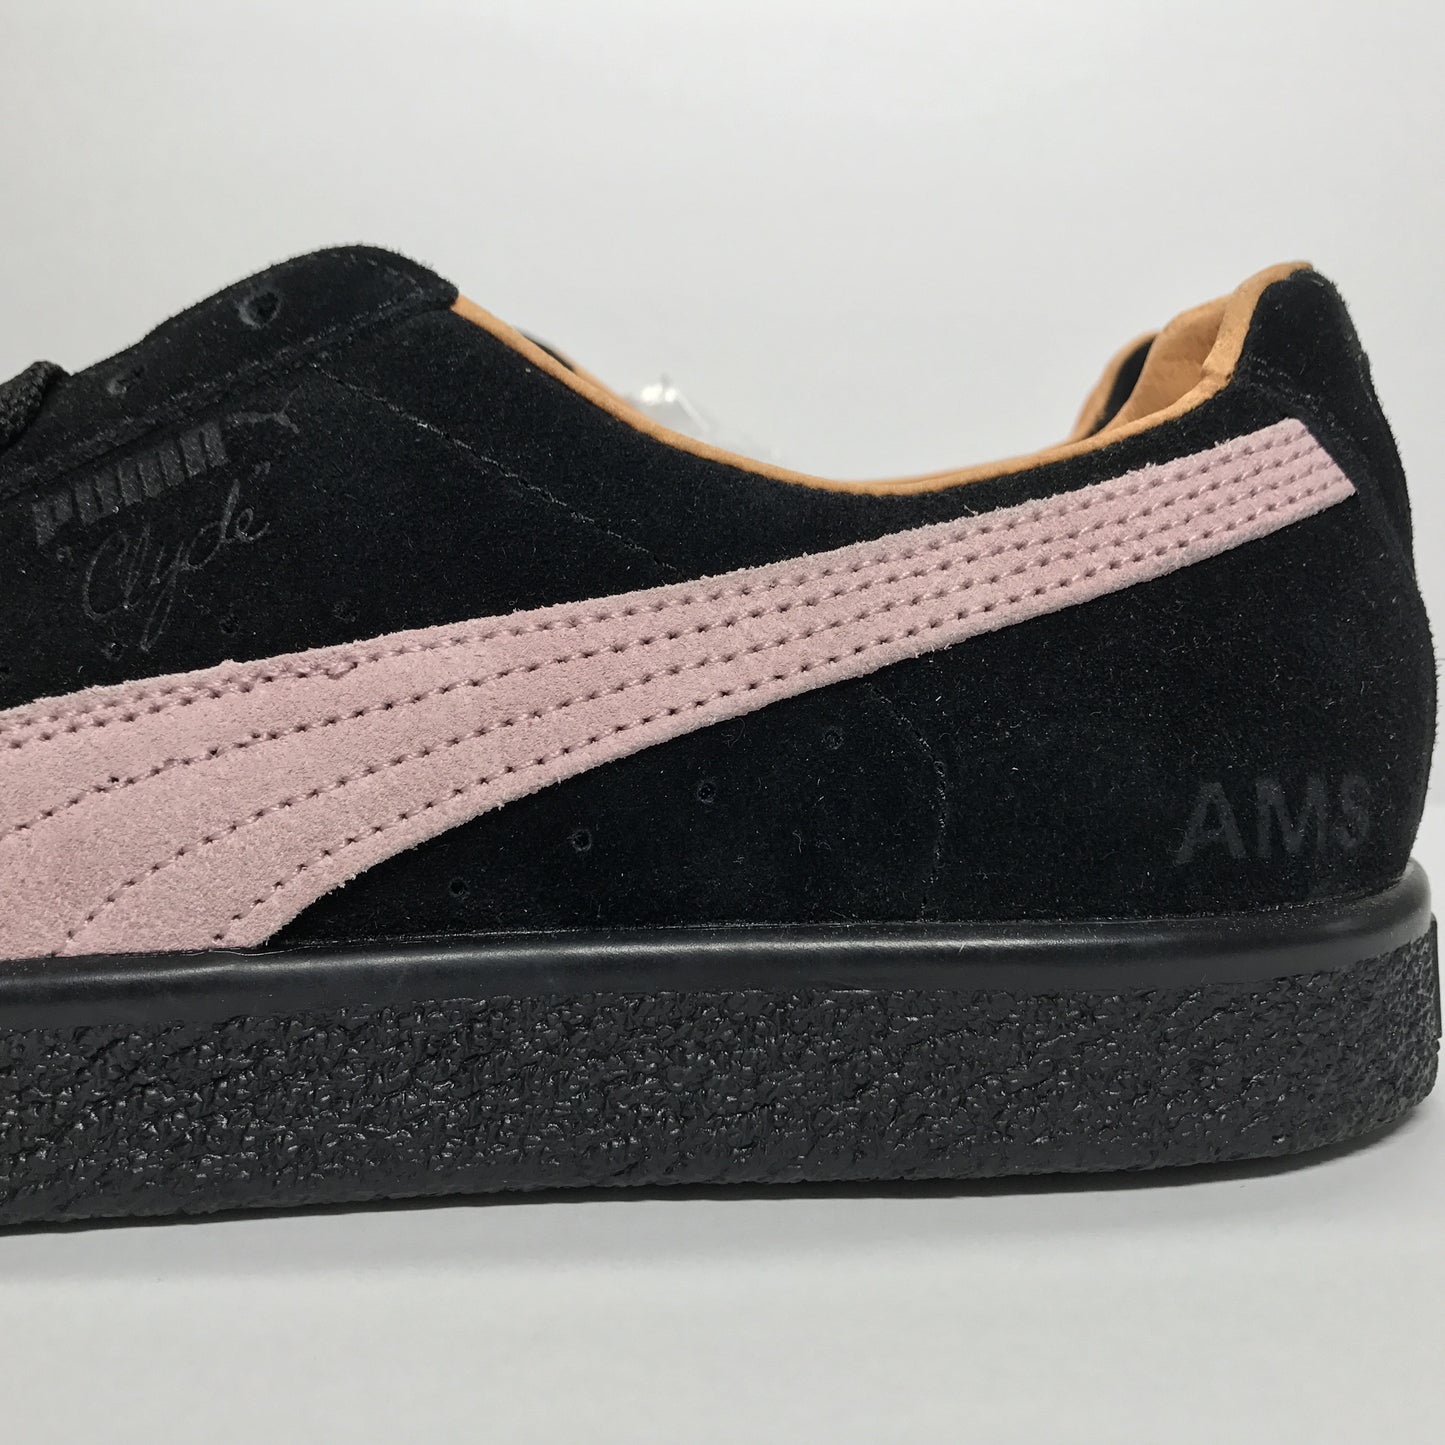 DS Puma Clyde x Patta Amsterdam Taille 8